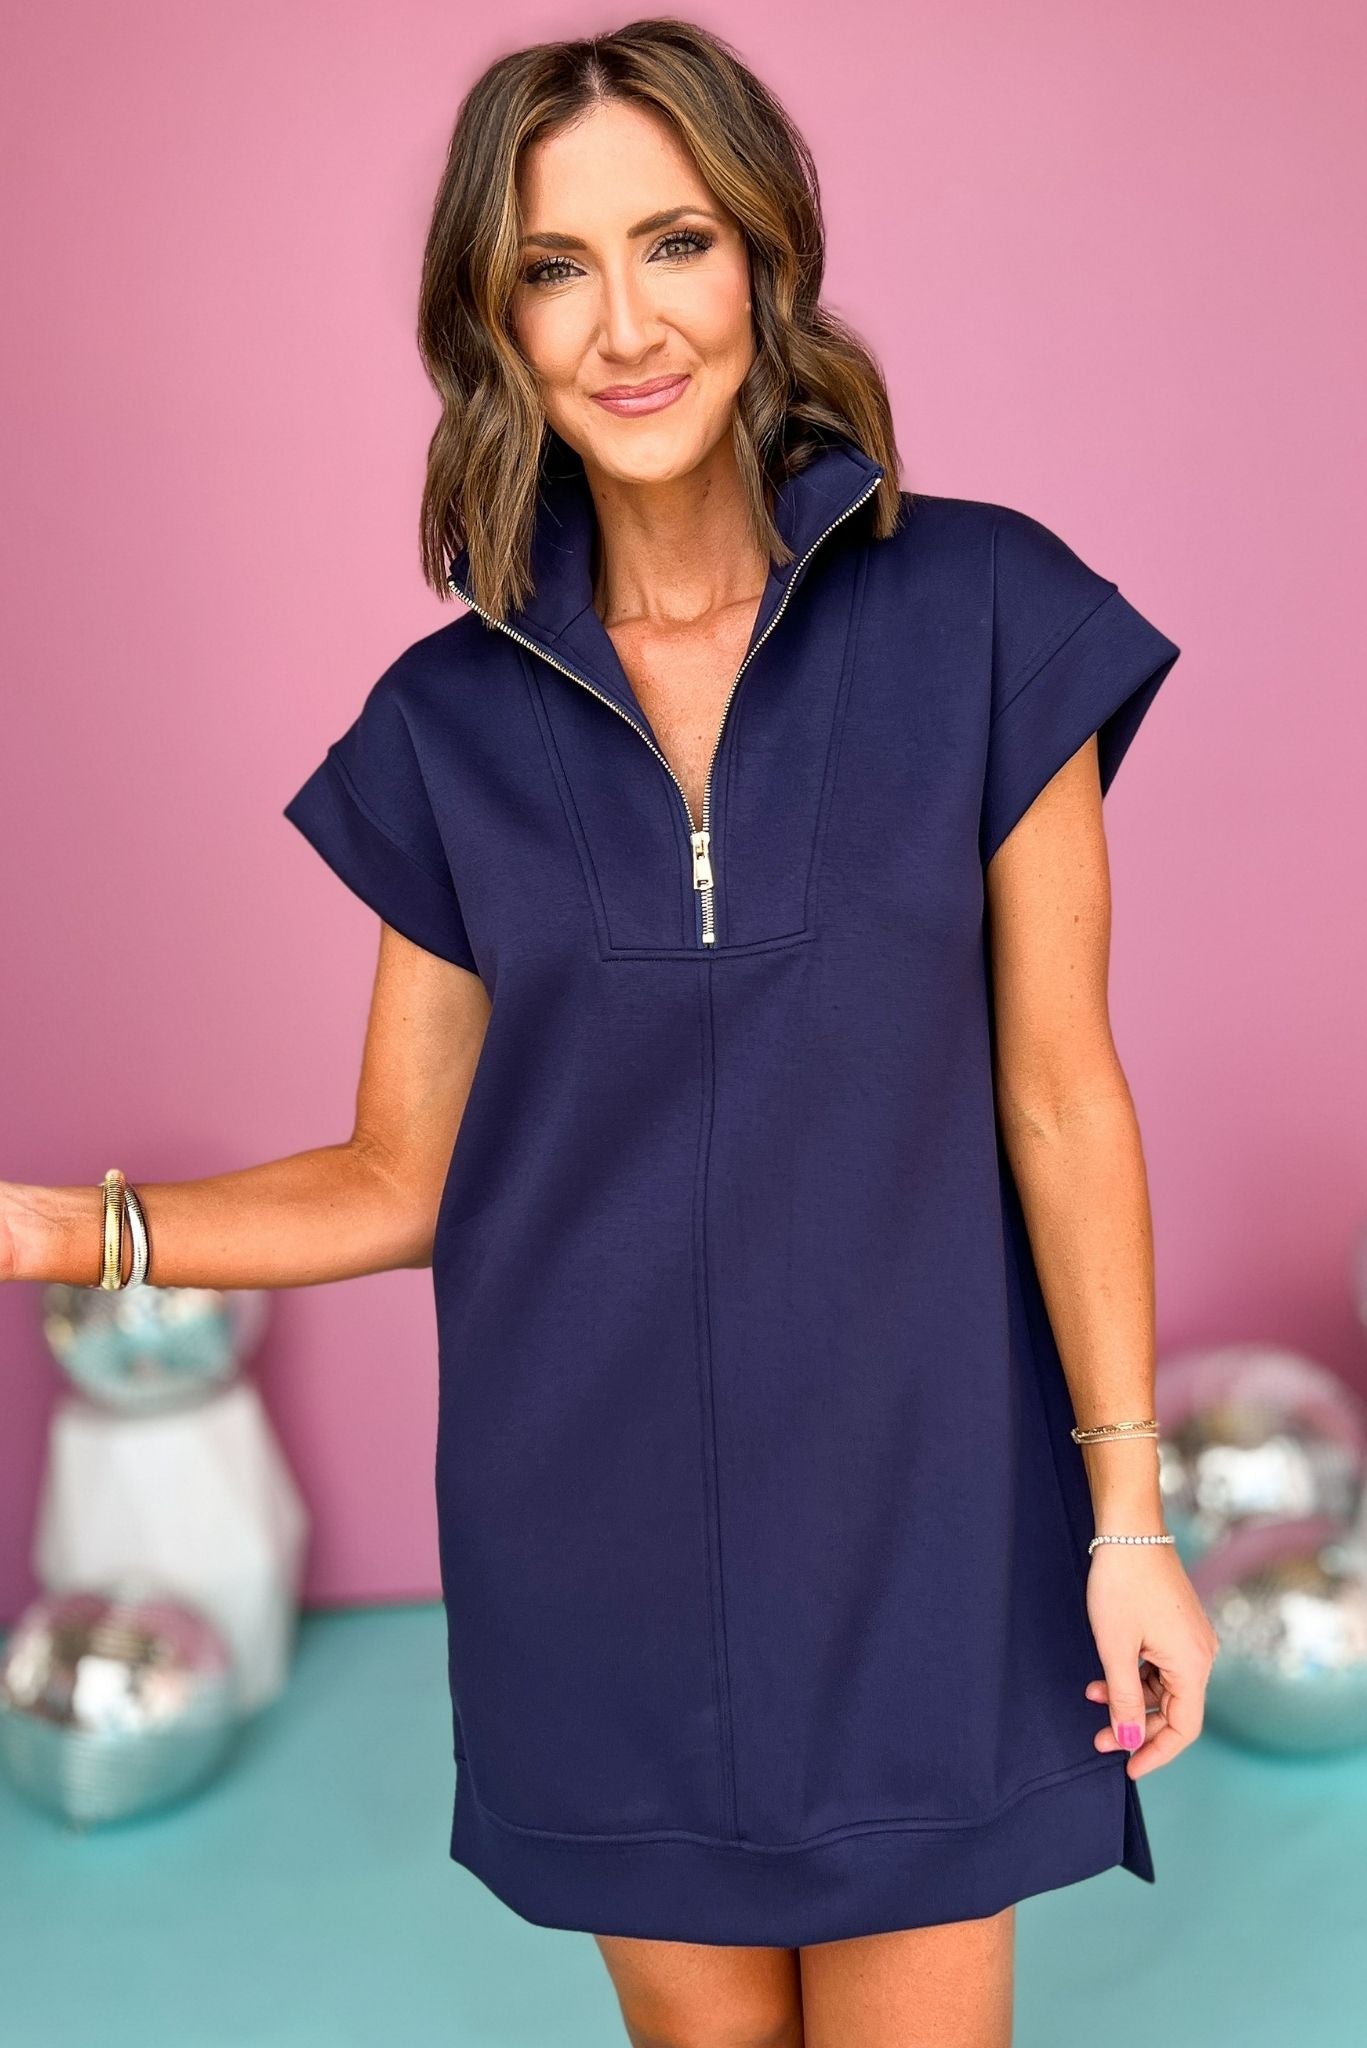 SSYS The Taylor Air 3/4 Zip Dress In Navy, ssys the label, air dress, air fabric, must have dress, spring fashion, affordable fashion, elevated dress, shop style your senses by mallory fitzsimmons, ssys by mallory fitzsimmons